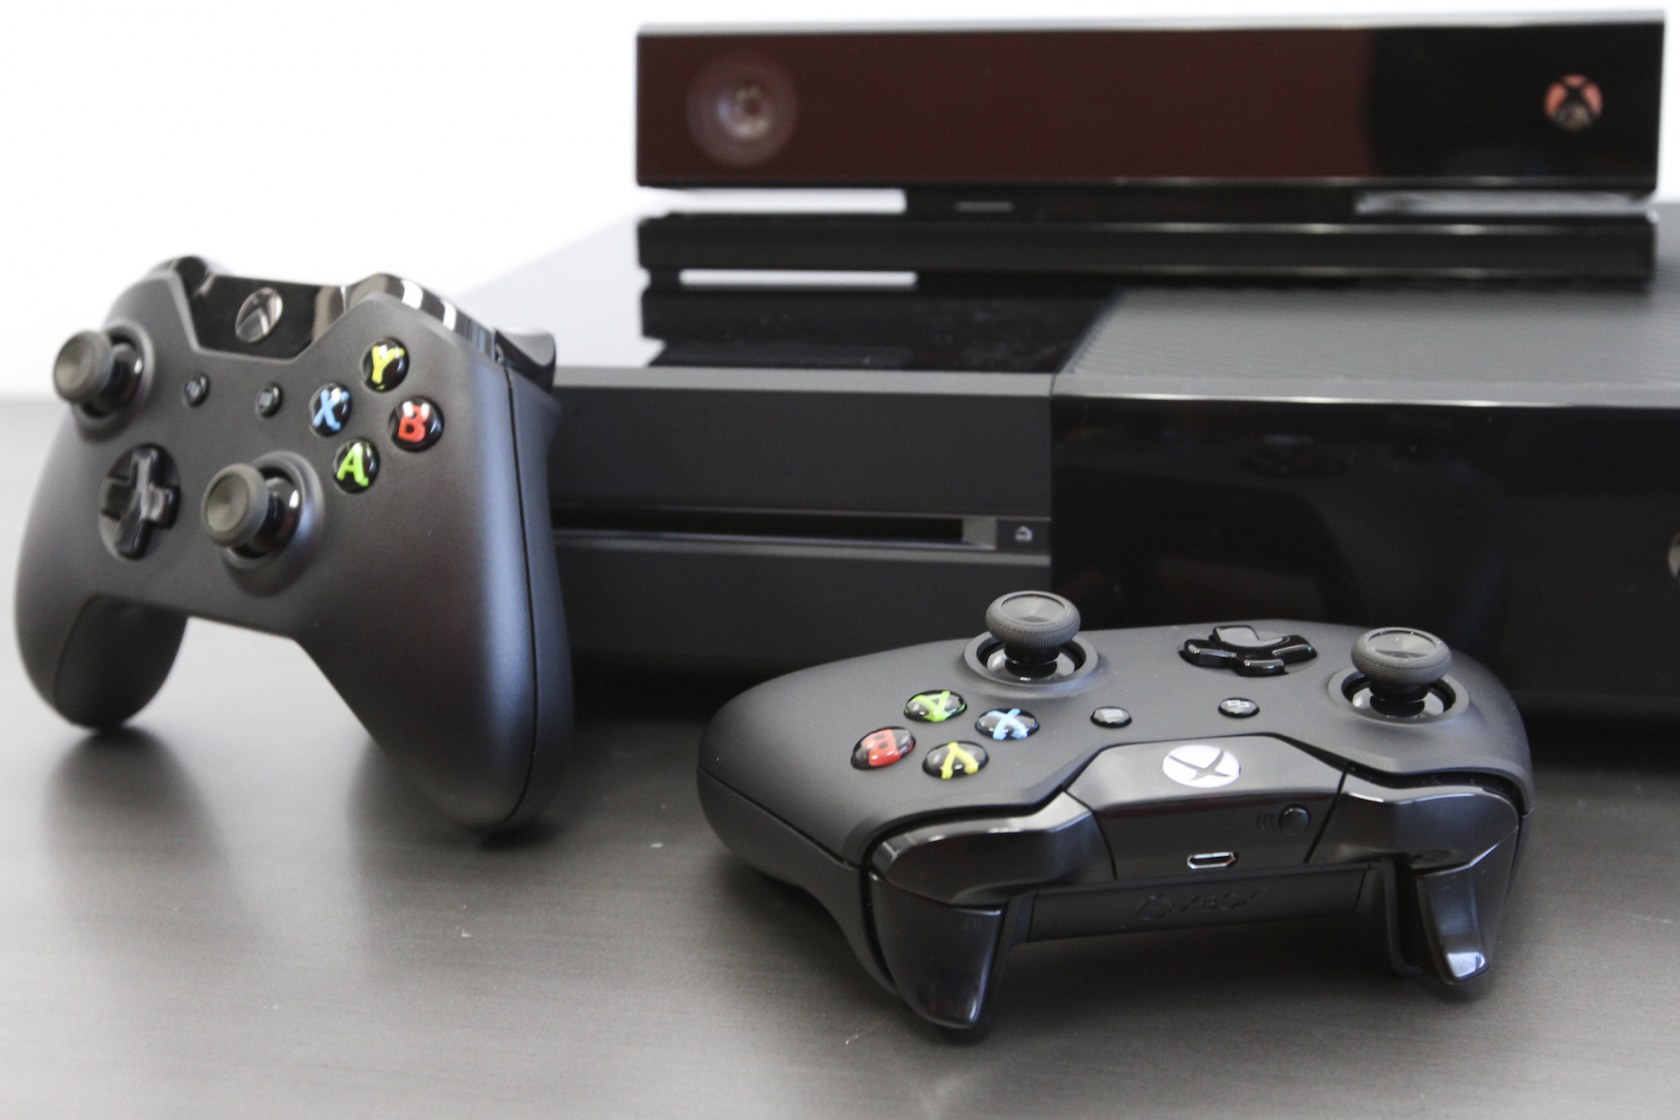 Microsoft is reportedly working on a cheaper, streaming-focused game console